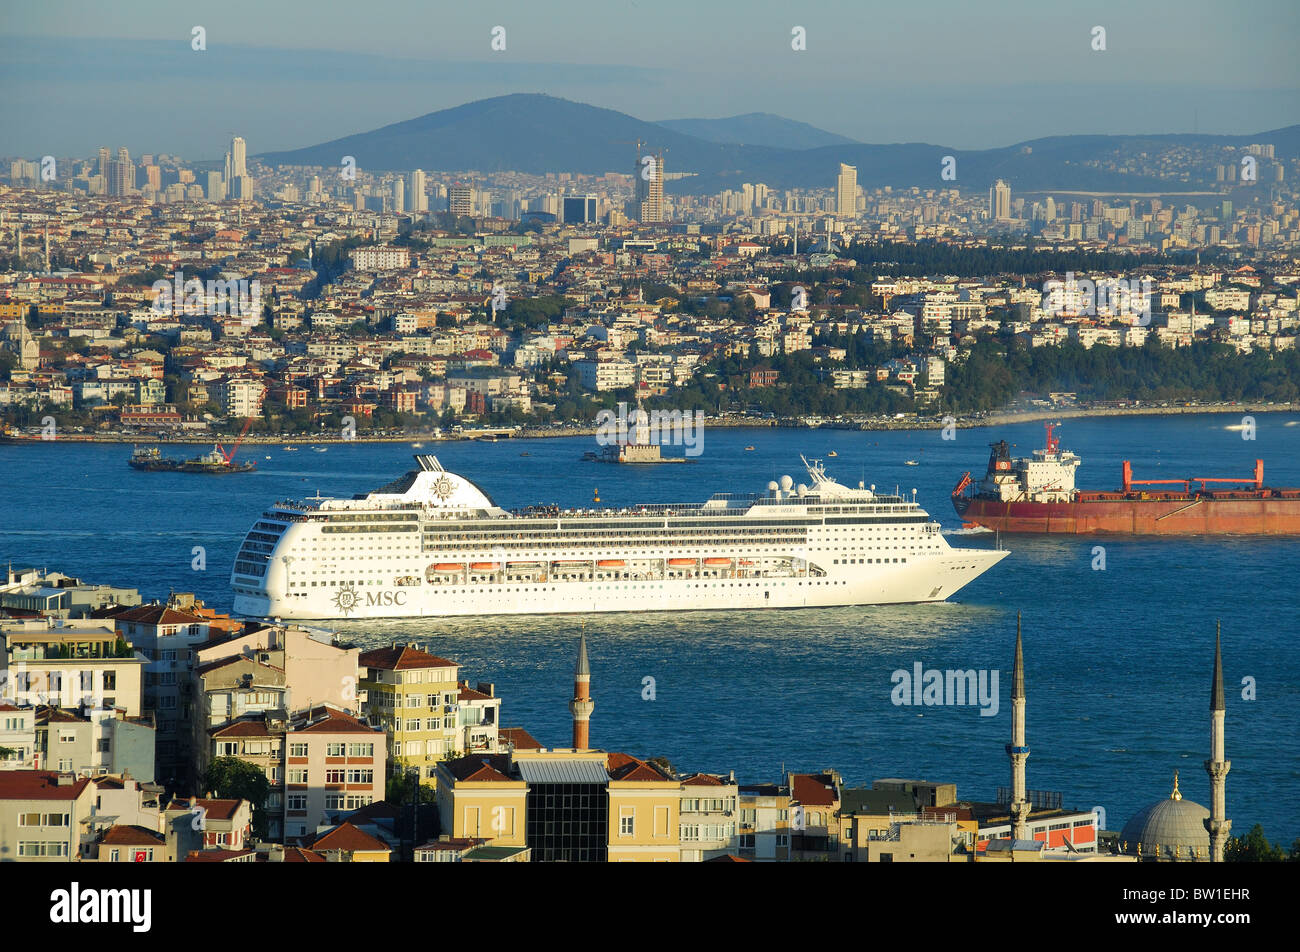 ISTANBUL, TURKEY. View of the Bosphorus strait from Beyoglu, with the cruise ship MSC Opera heading for the Sea of Marmara. 2010 Stock Photo